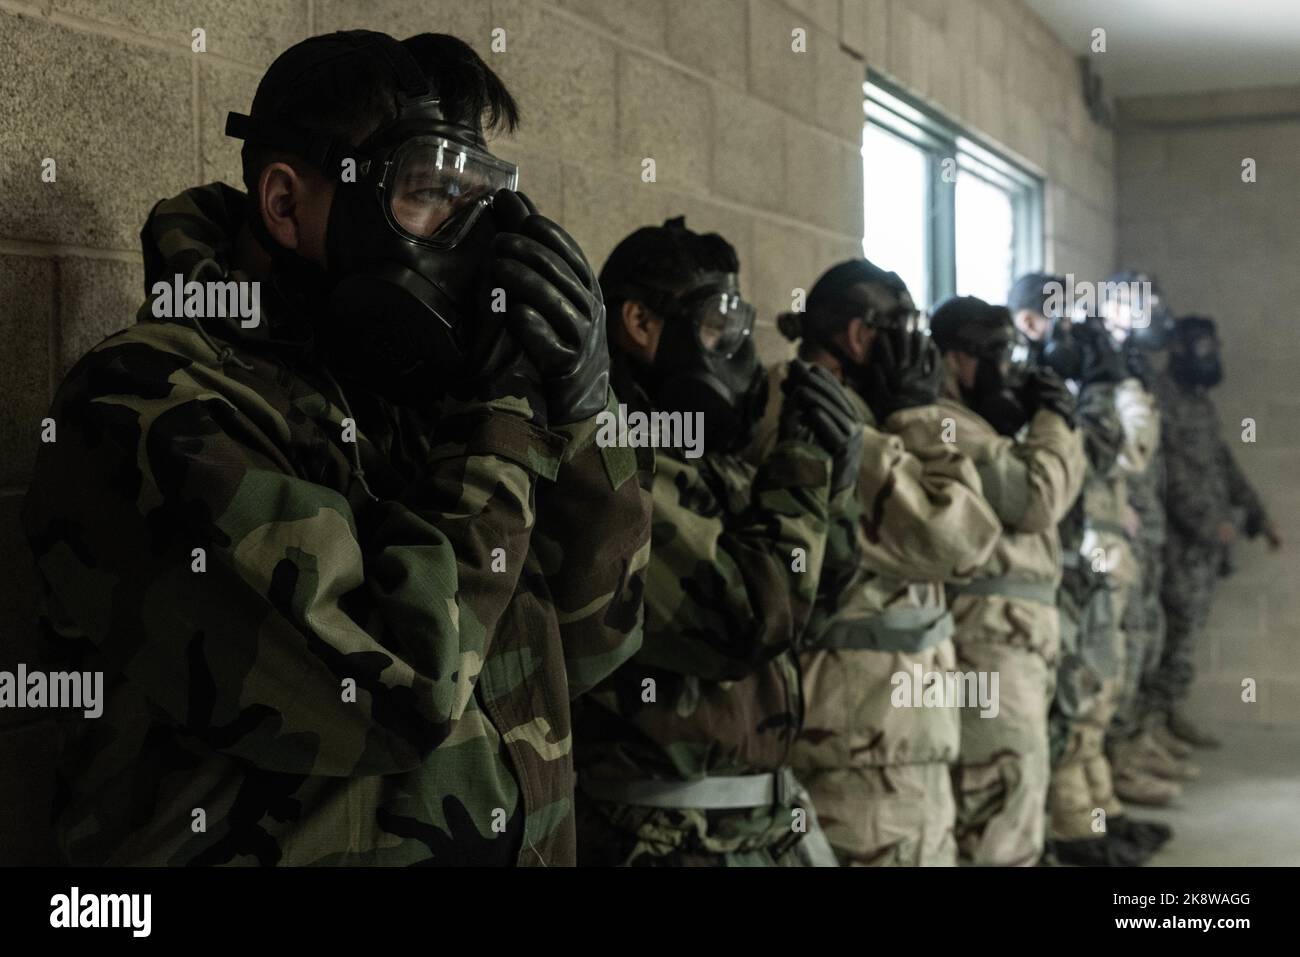 U.S. Marines with Headquarters Battalion, 1st Marine Division, clear their masks of chlorobenzalmalononitrile gas, commonly known as CS gas, during chemical, biological, radiological and nuclear defense training at Marine Corps Base Camp Pendleton, California, Oct. 20, 2022. CBRN training is conducted annually to ensure Marines know how to use their protective gear in the event of a chemical attack. (U.S. Marine Corps photo by Lance Cpl. Kayla Halloran) Stock Photo